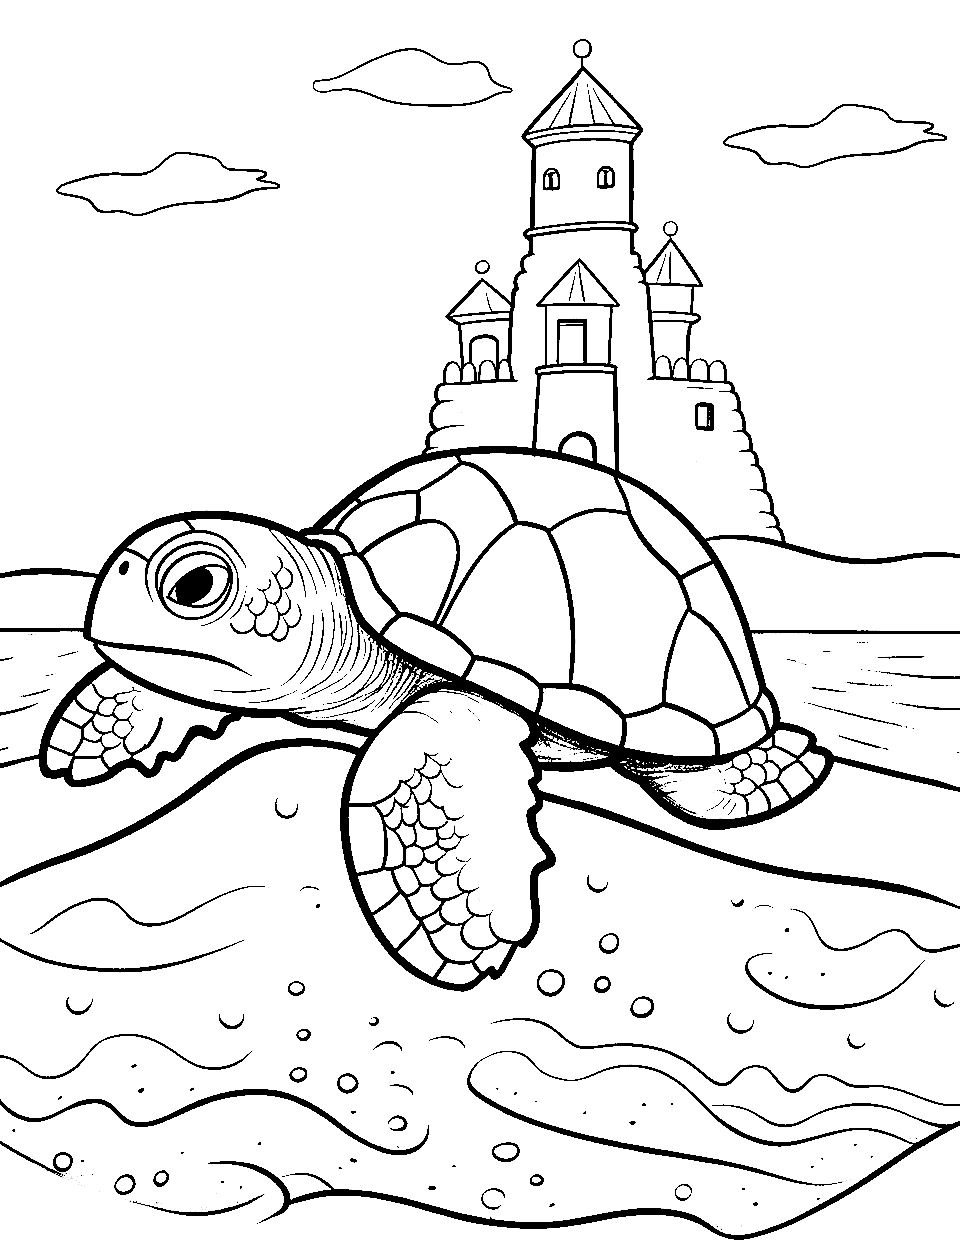 Seaside Sand Castle Turtle Coloring Page - A turtle with its sandcastle by the distance.